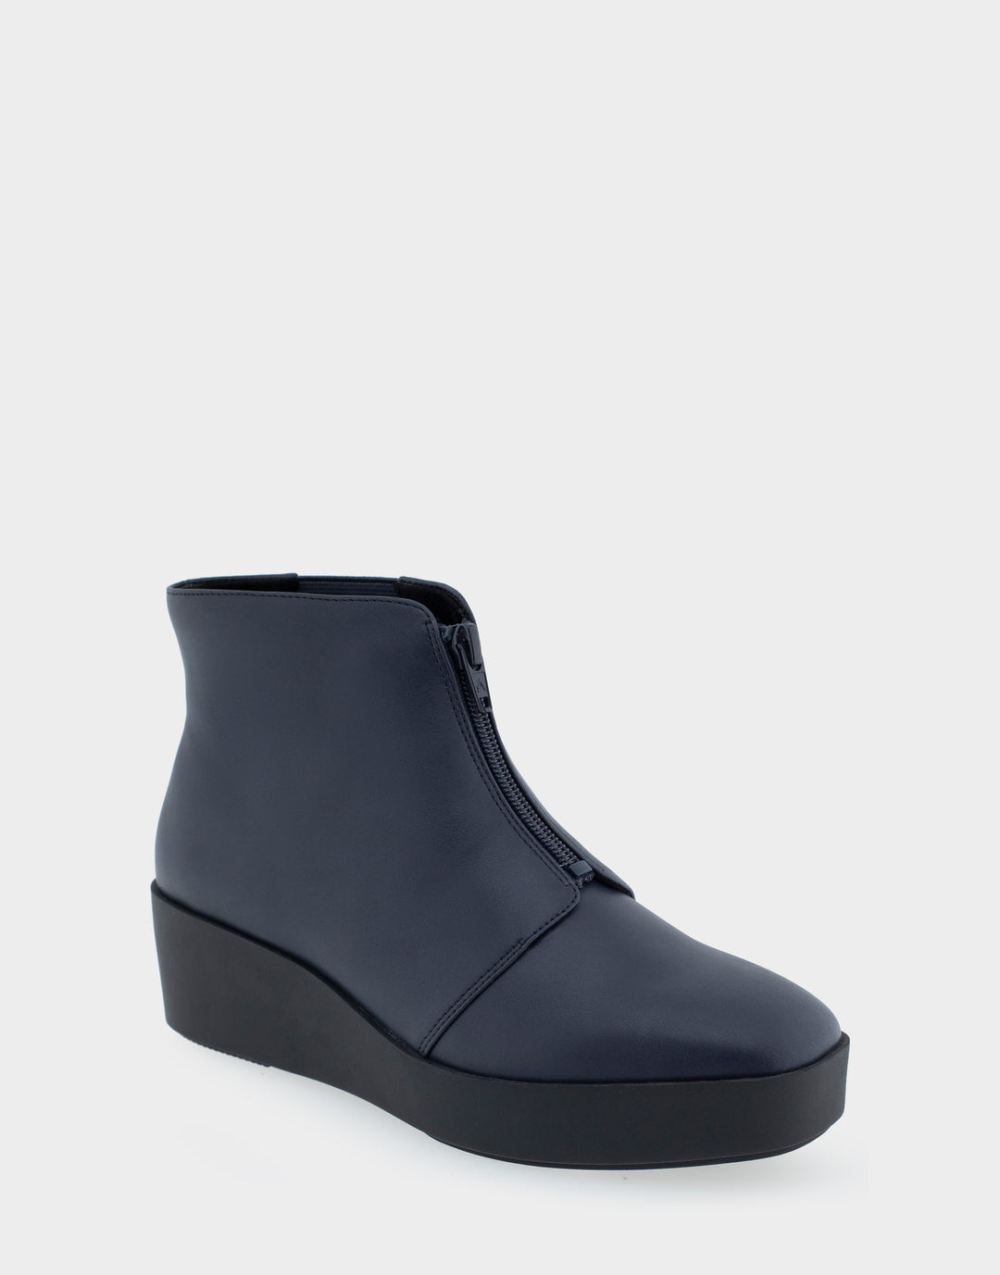 Women's | Carin Navy Faux Leather Wedge Heel Ankle Boot